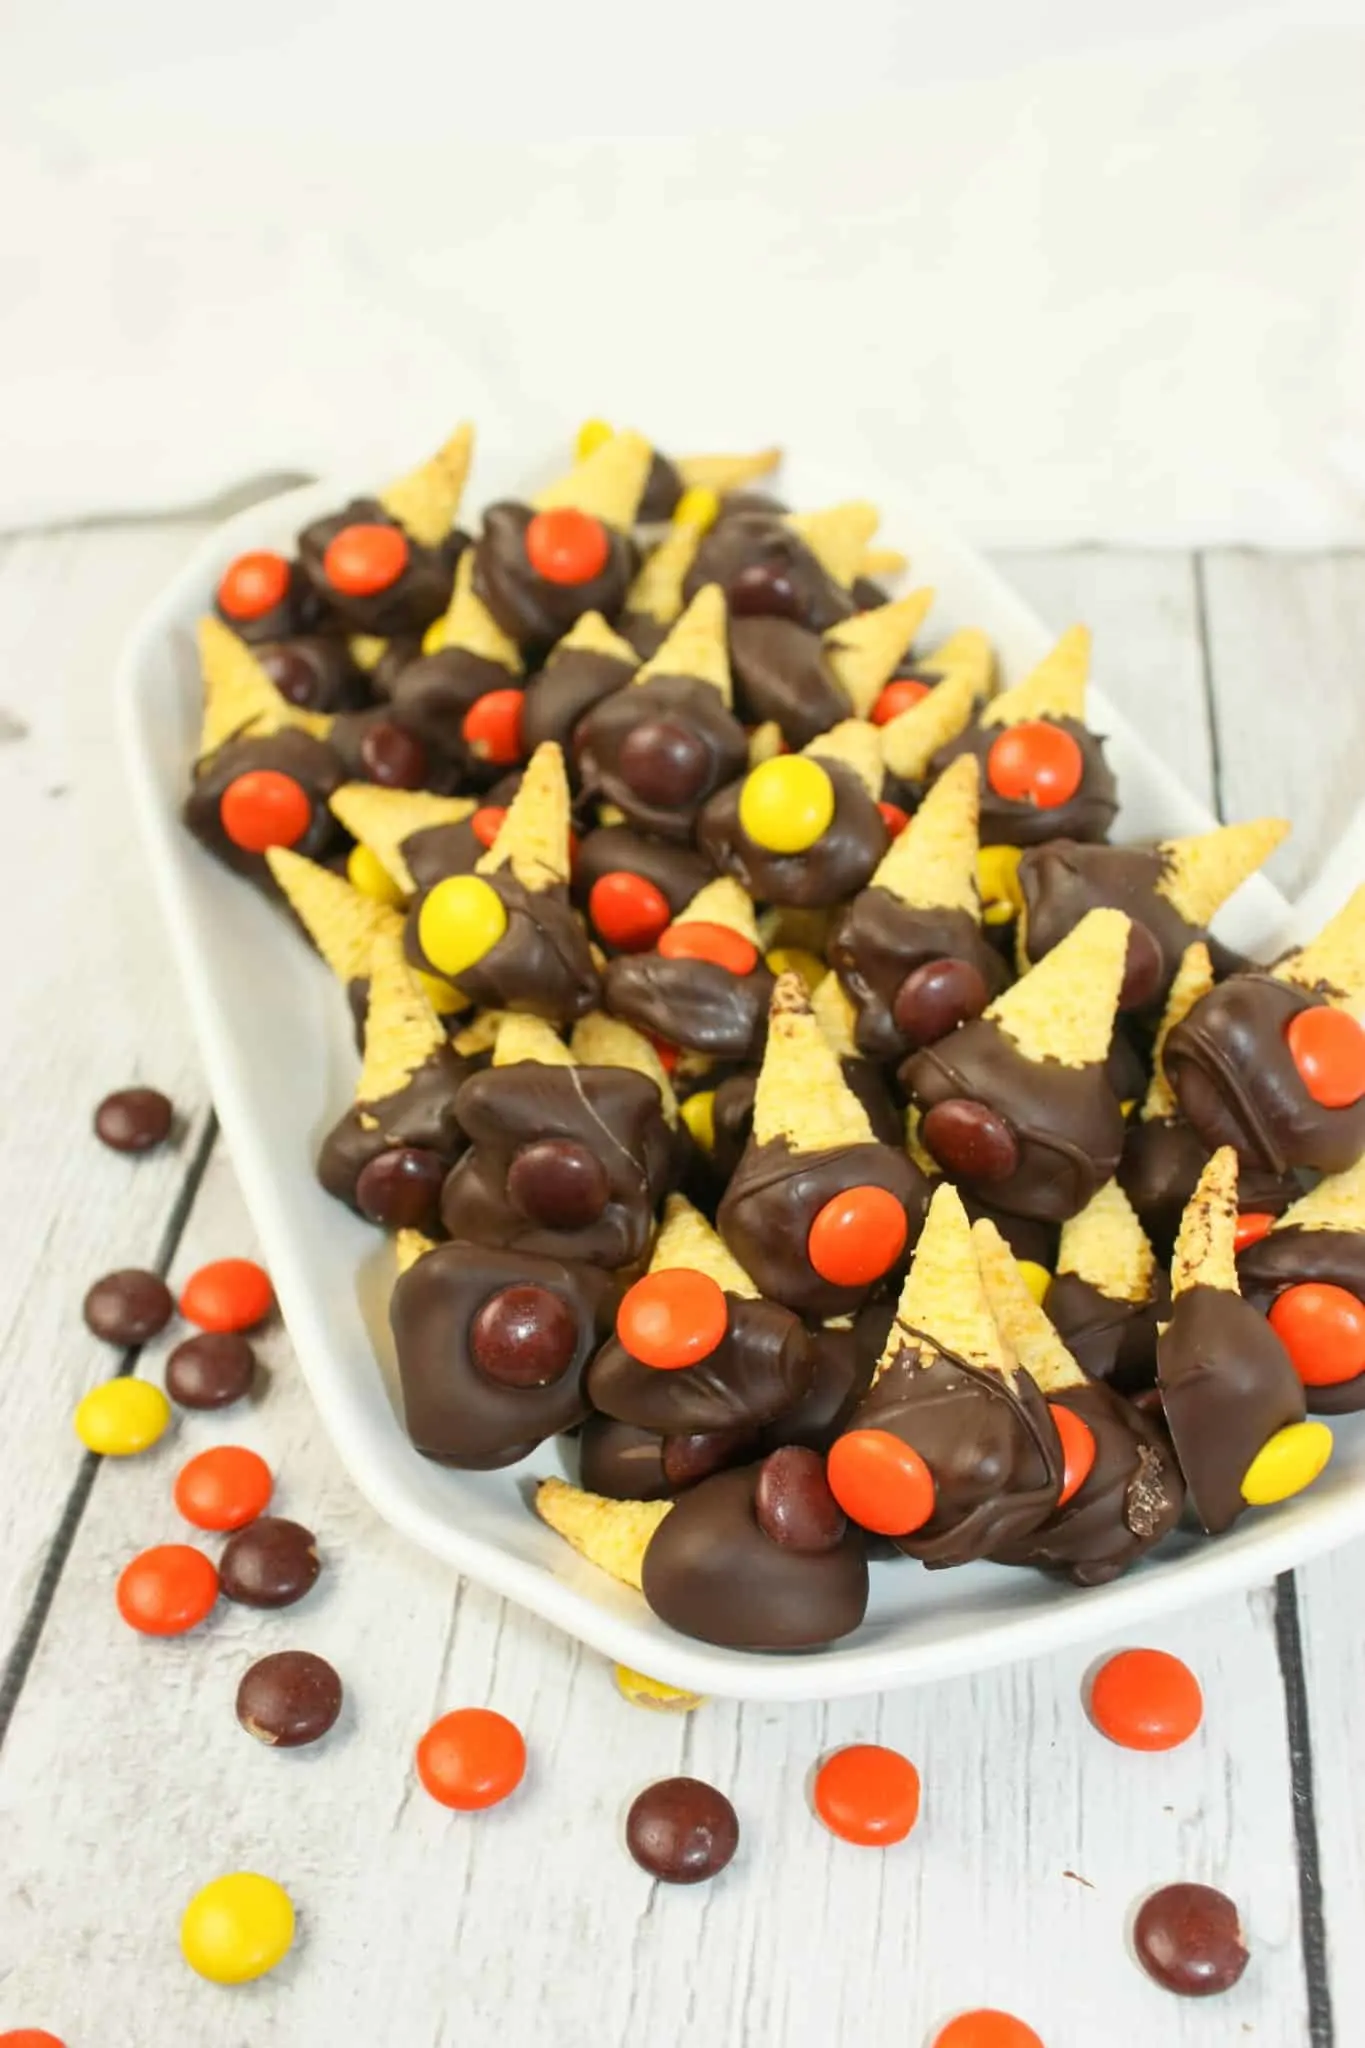 Chocolate Dipped Bugles are a simple but very tasty treat.  Make sure your bugles are gluten free and enjoy this chocolate, peanut butter snack any time of the year.  